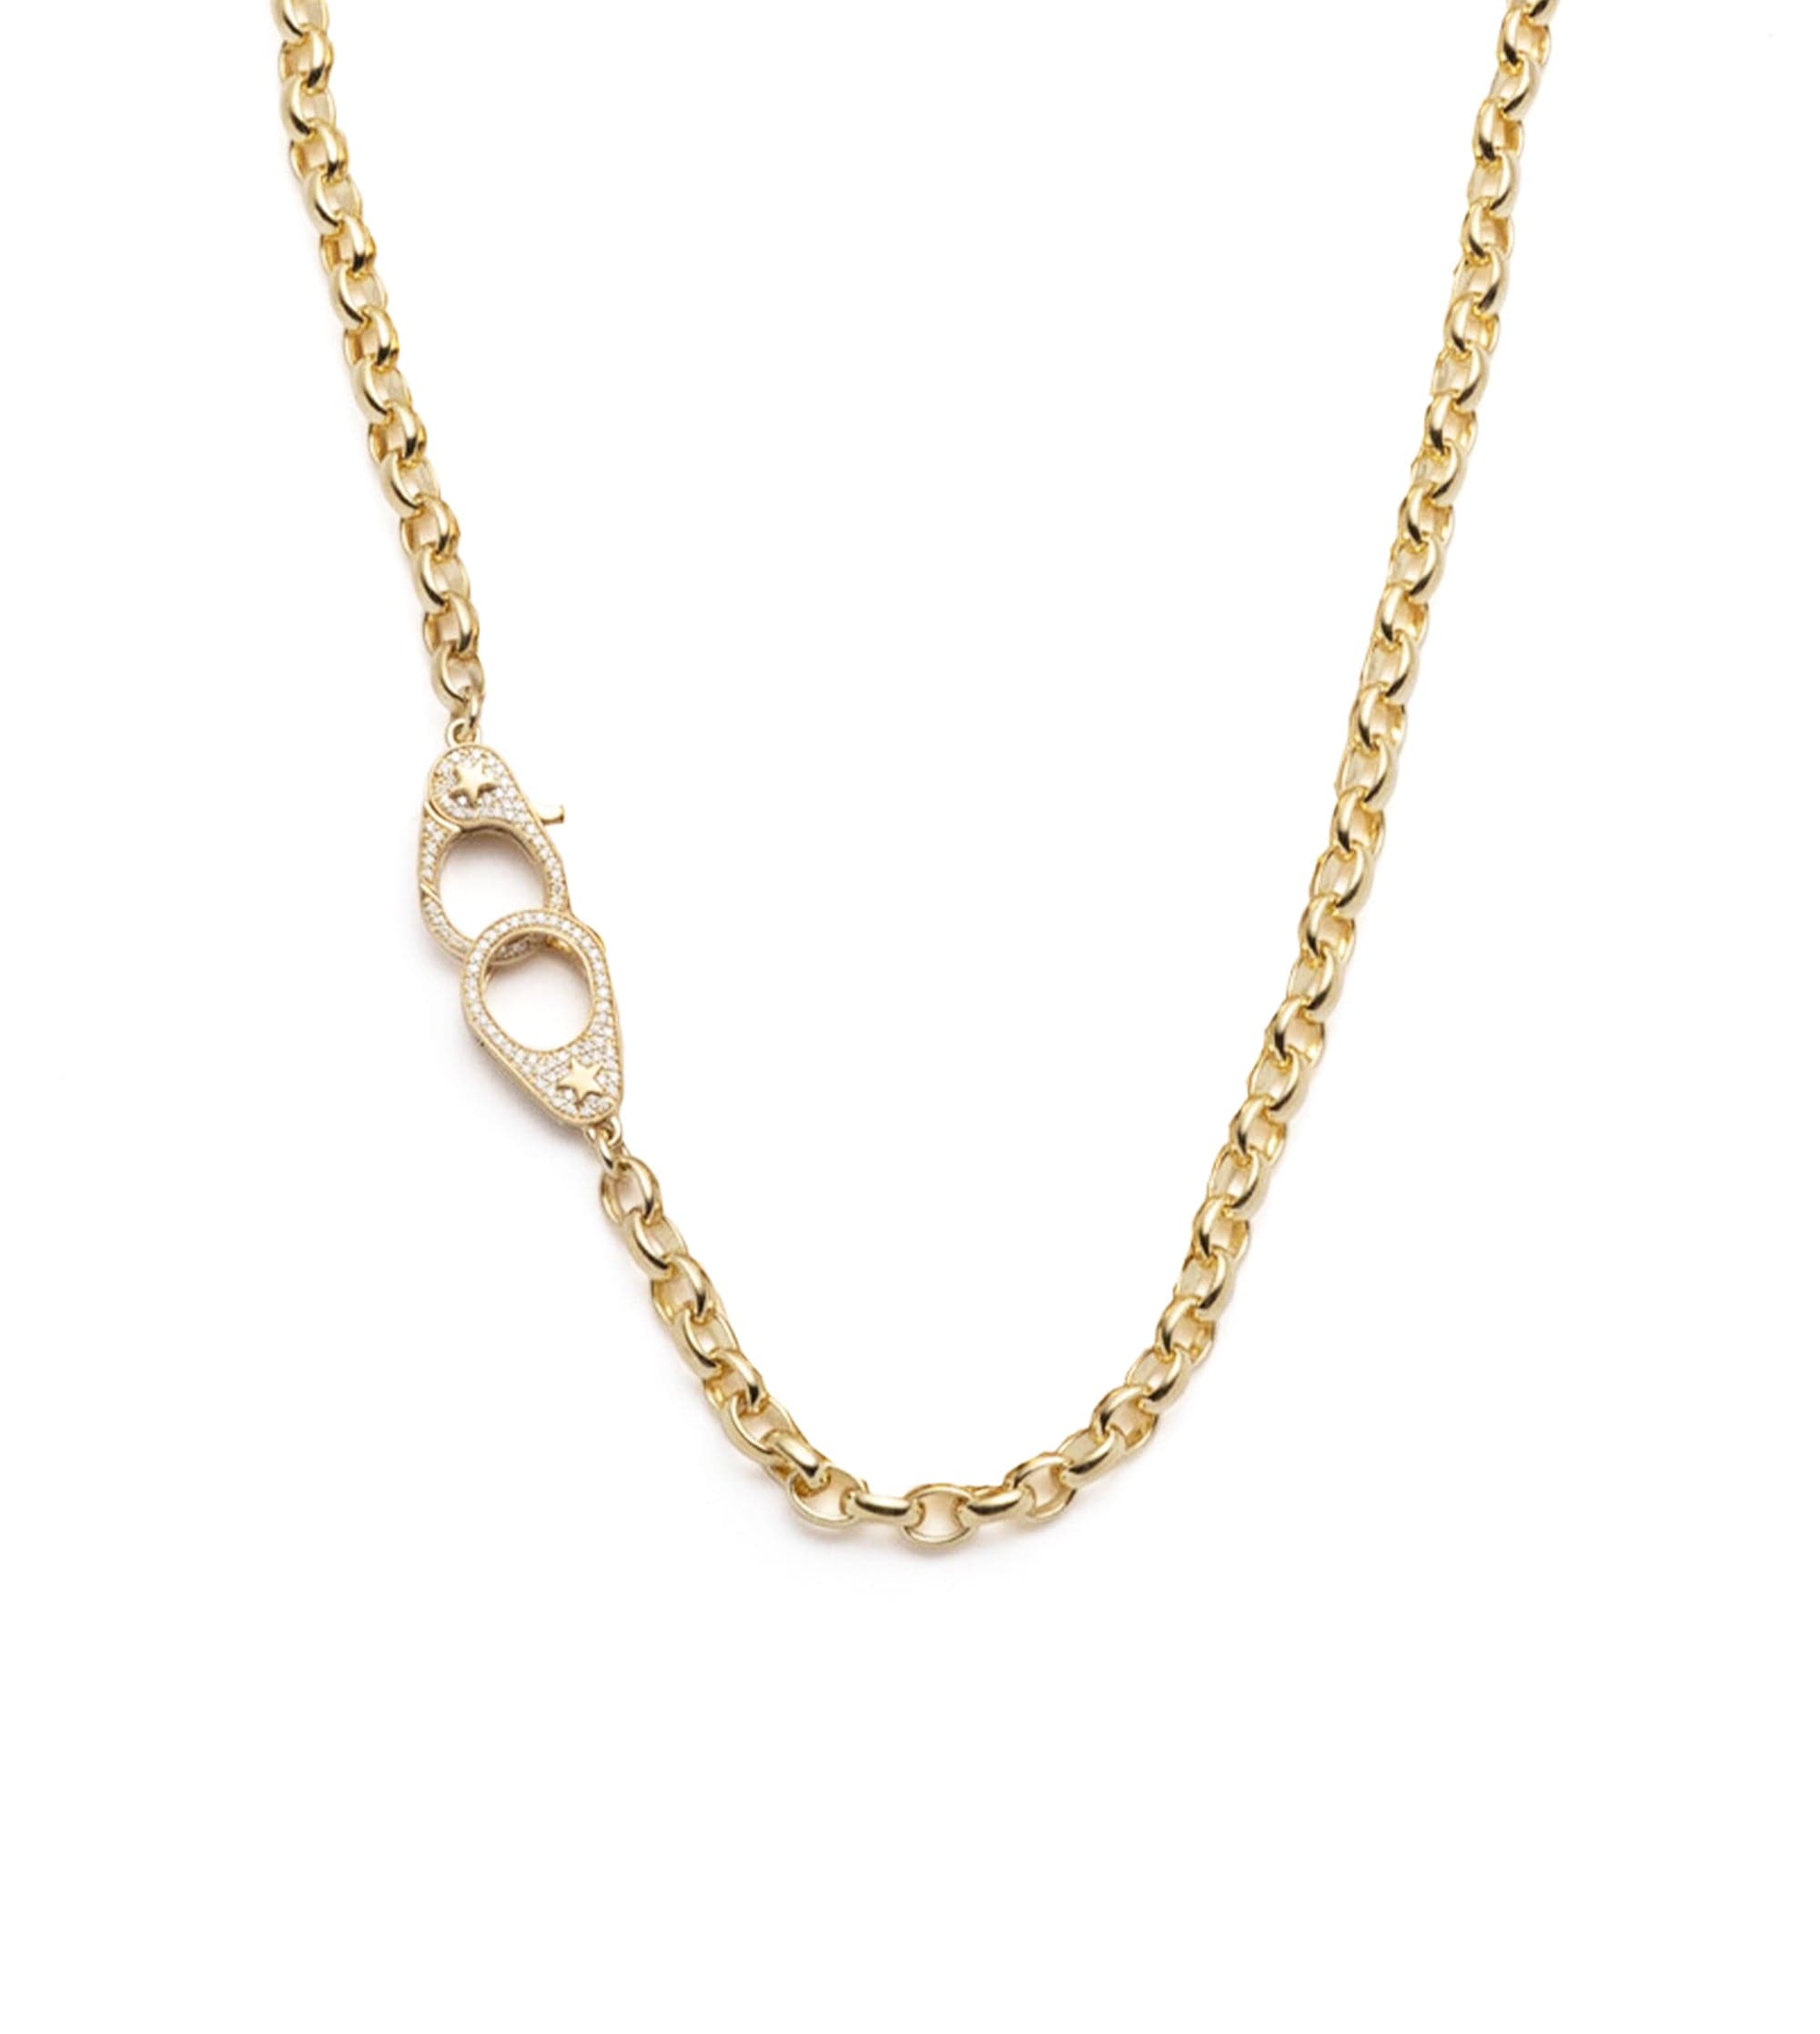 NOTABLE OFFSET INITIAL NECKLACE - H - SO PRETTY CARA COTTER